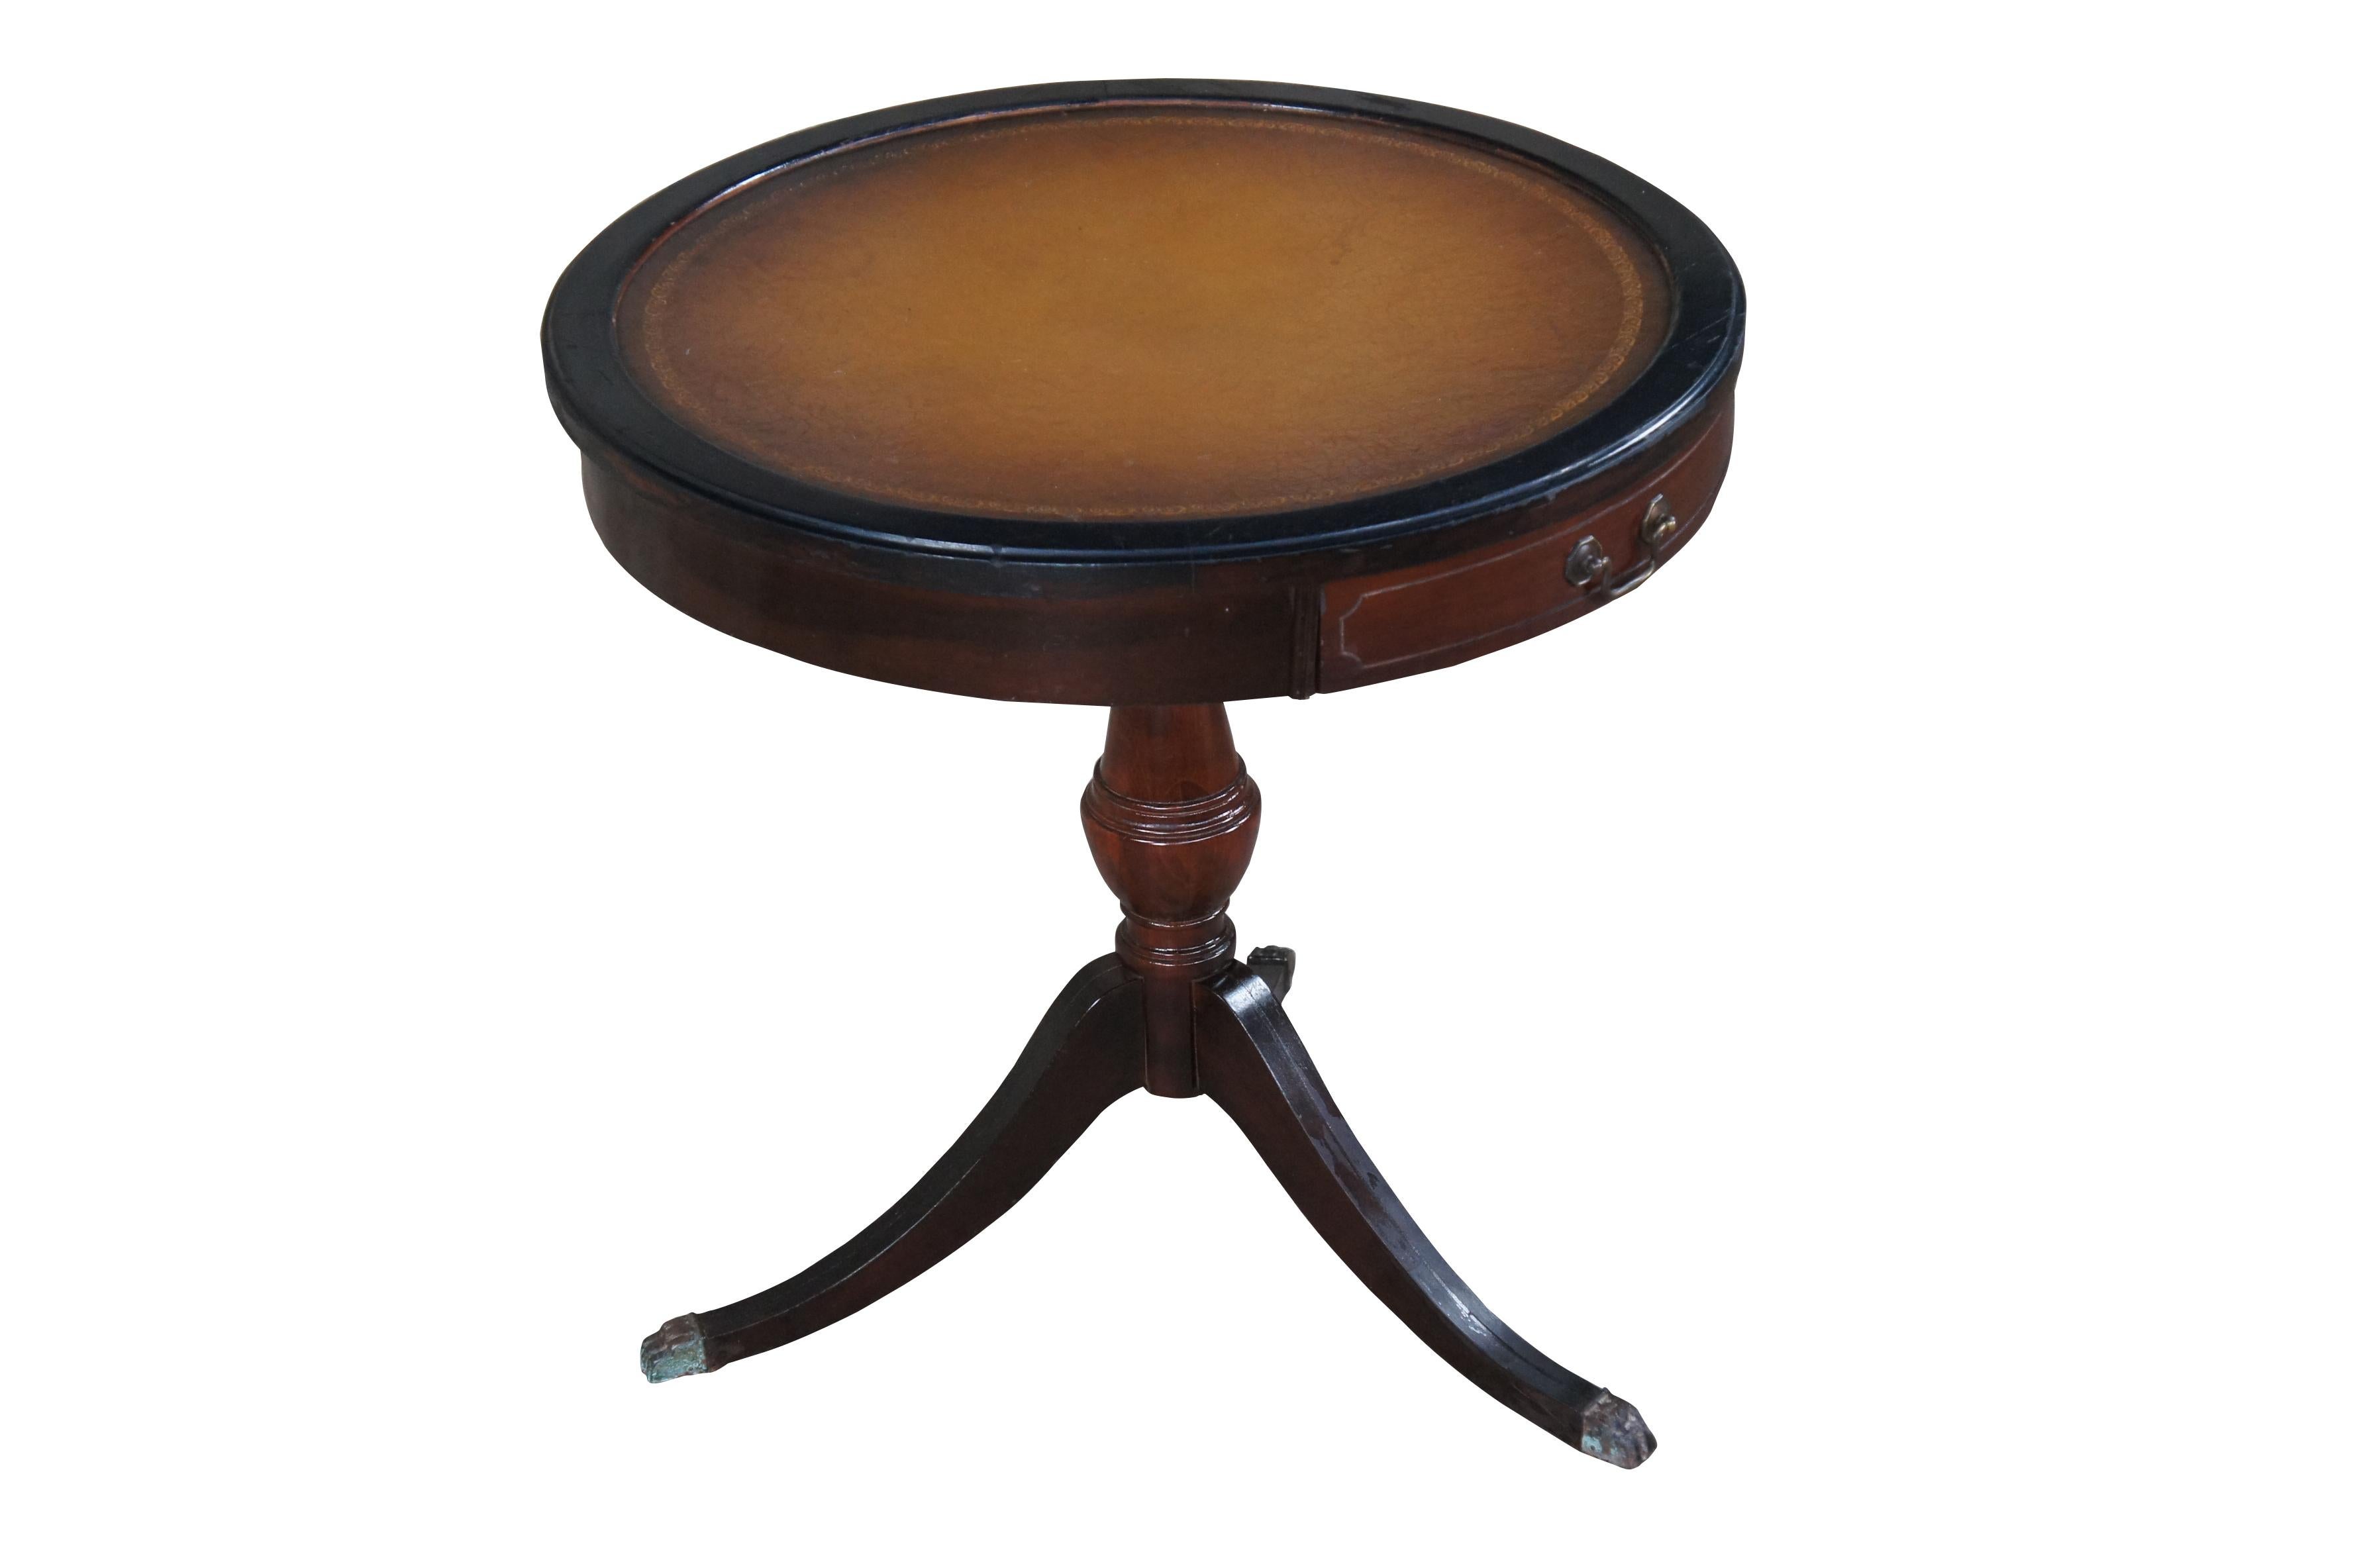 Mid 20th century Mersman side table.  Made of mahogany featuring round form with tooled leather top, one drawer, and tri foot pedestal base with brass capped claw feet.

The company was founded as ‘Mersmans Tables’ in the 1870s by sawmill owner J.